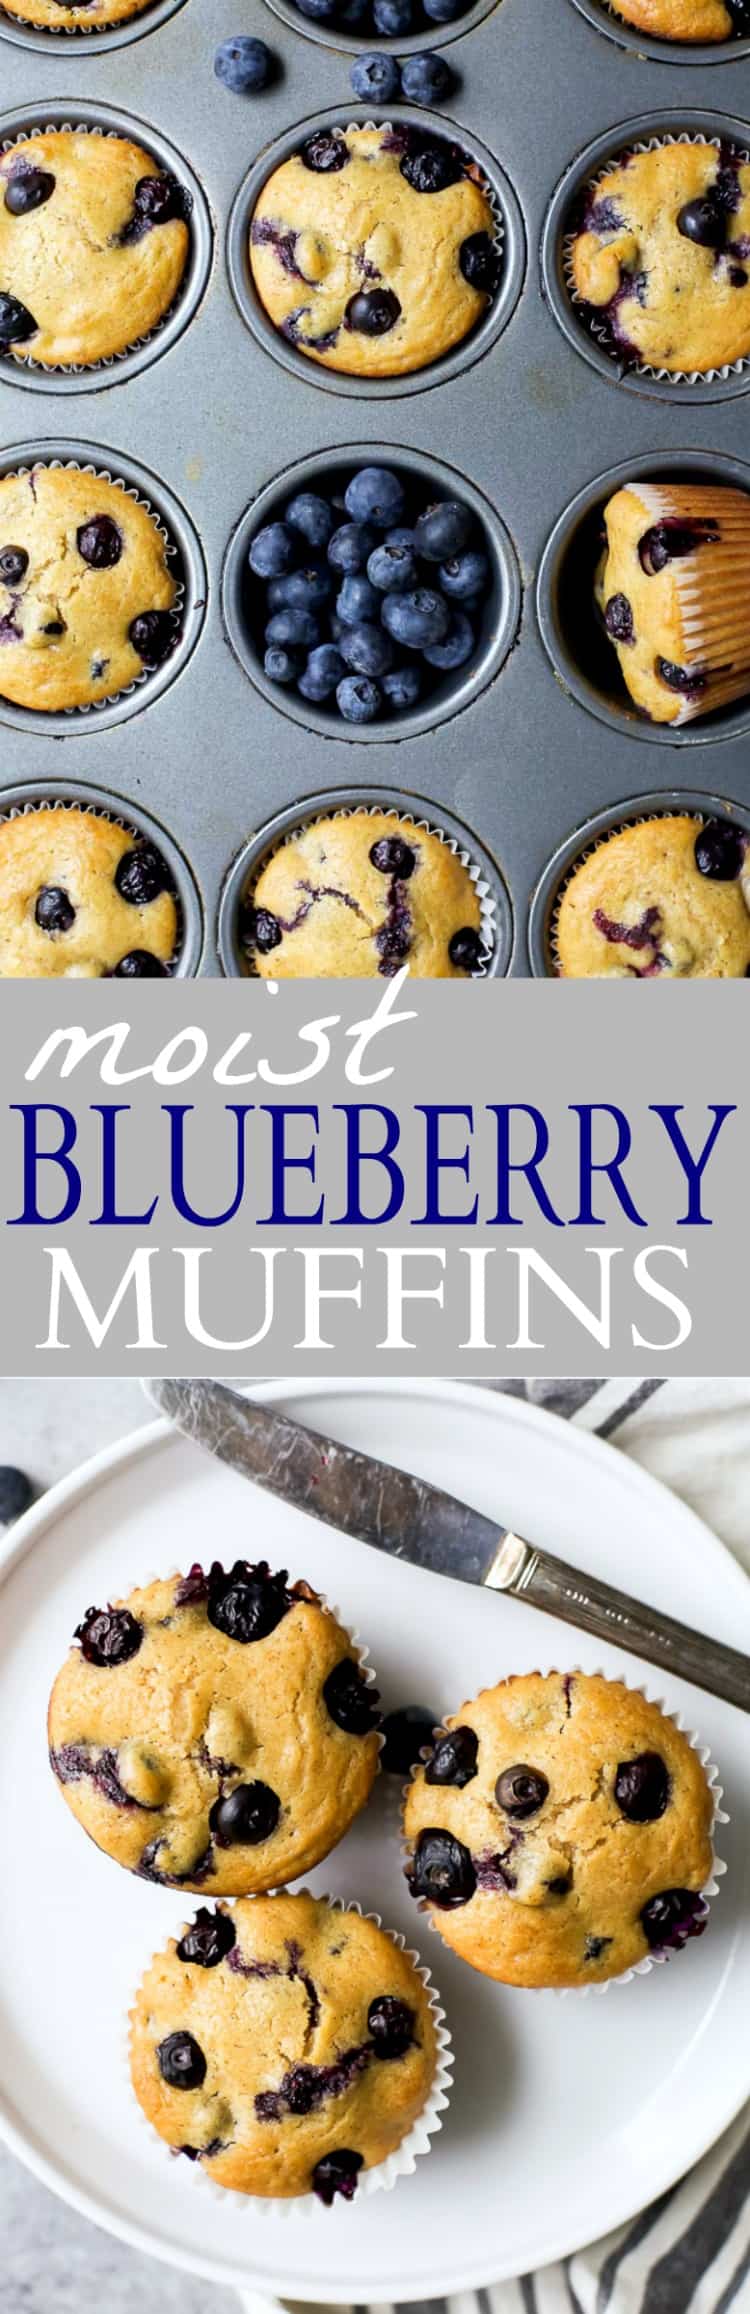 A collage of two images of blueberry muffins with one showing them on a plate and the other showing them in the pan